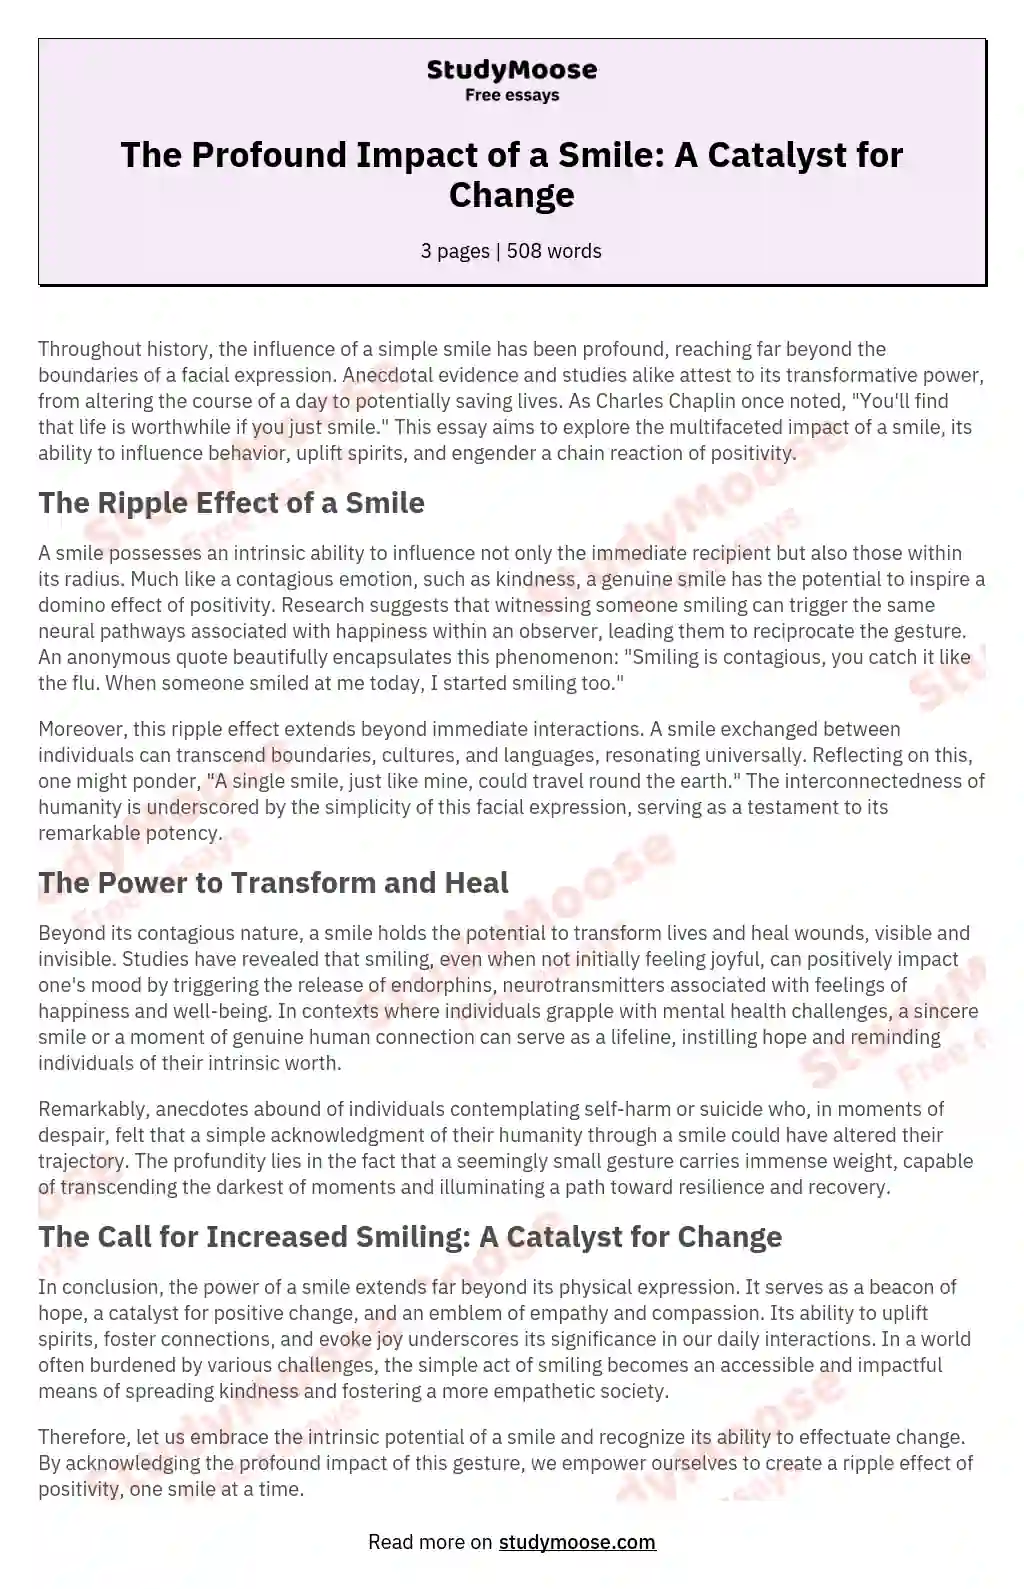 The Profound Impact of a Smile: A Catalyst for Change essay